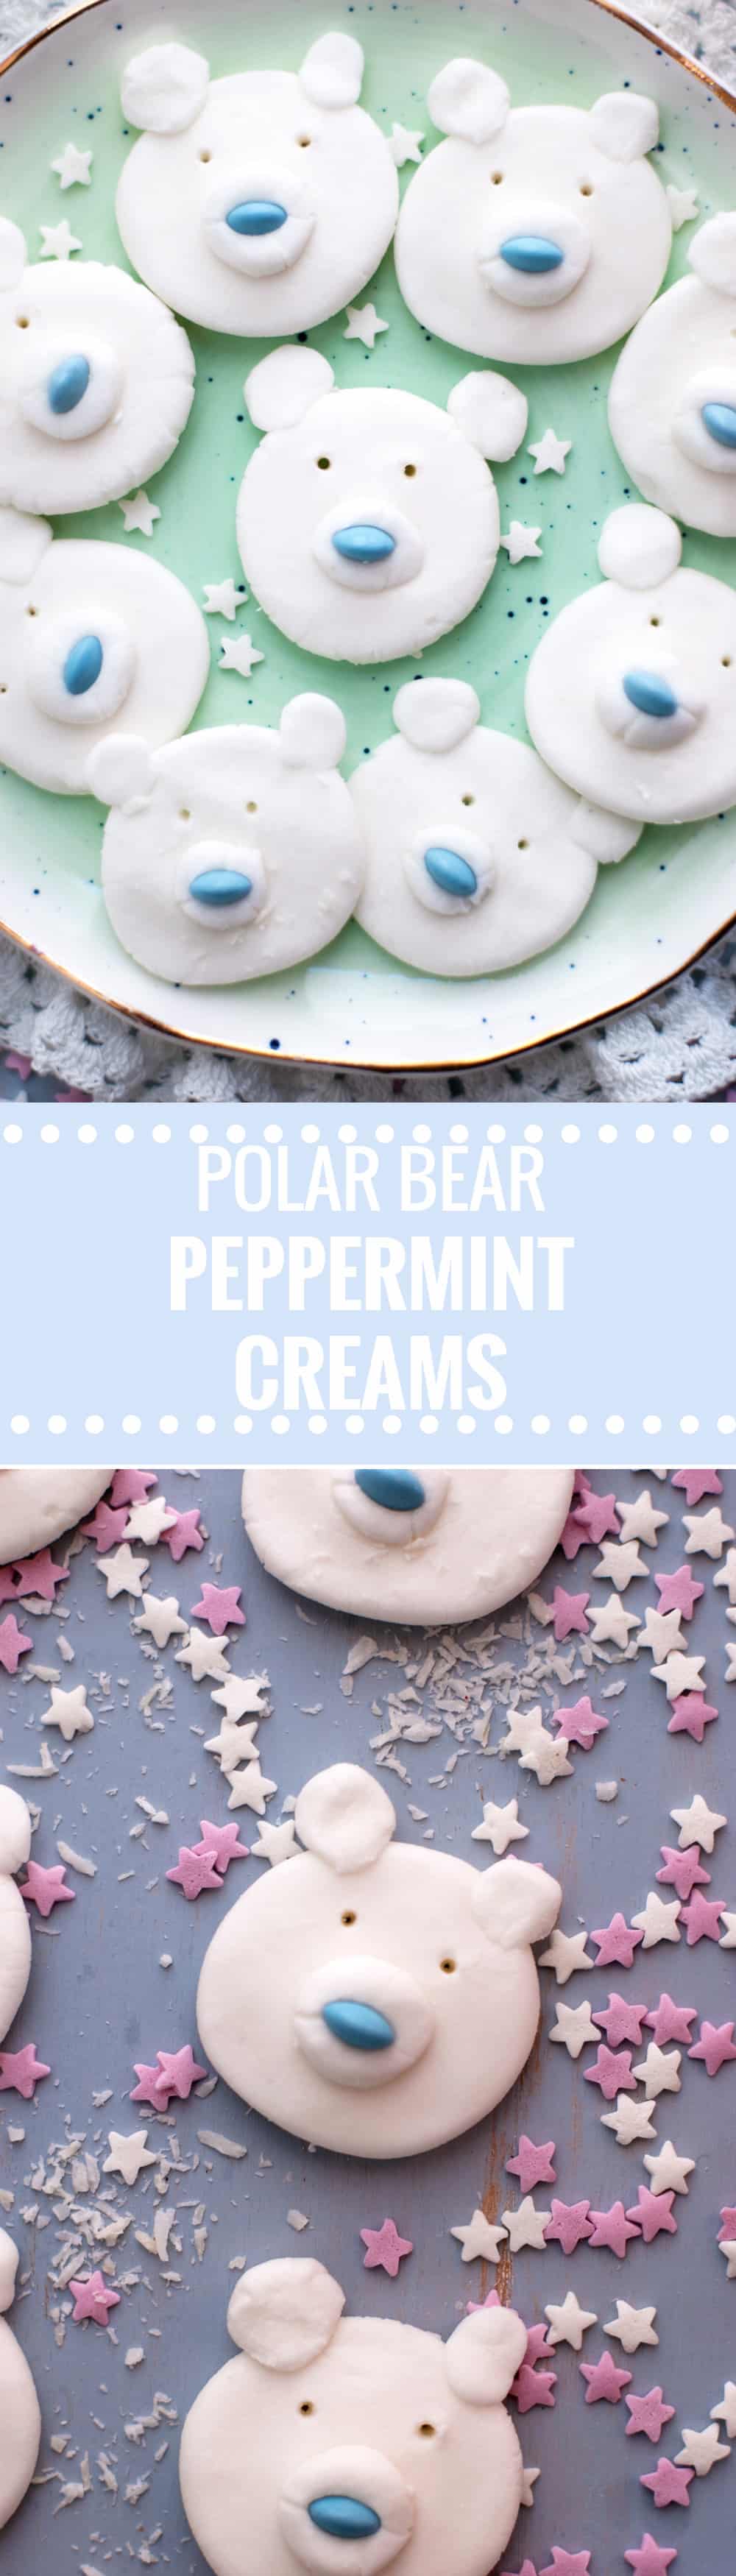 Polar Bear Peppermint Creams. Super fun and easy treat for this holiday season! Kids are going to LOVE them! | via @annabanana.co